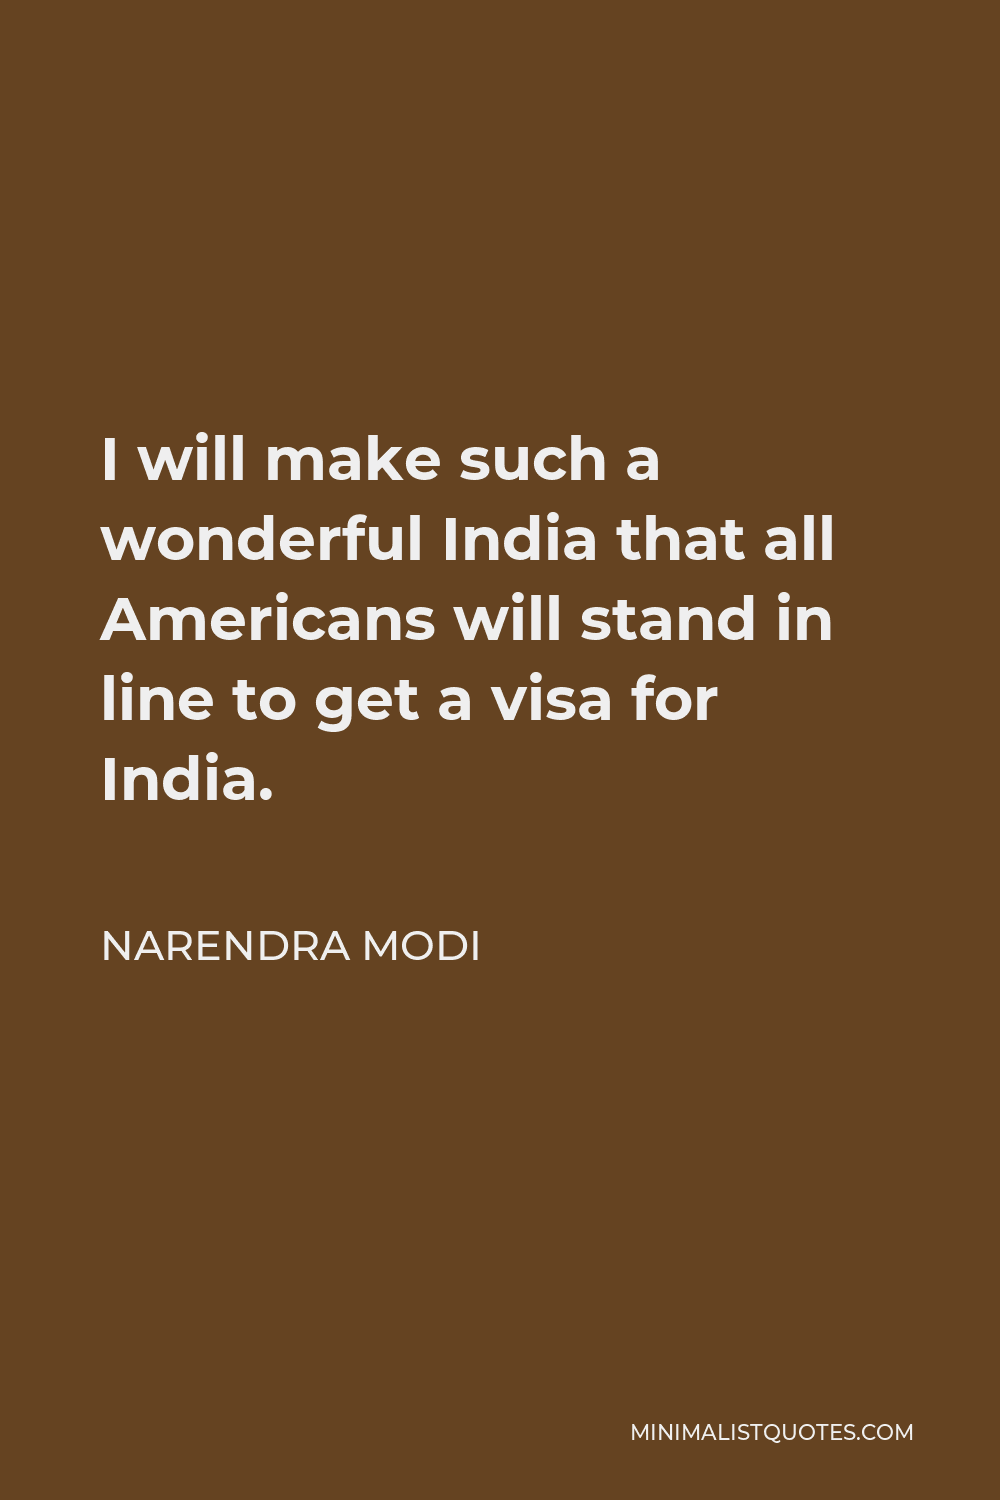 Narendra Modi Quote - I will make such a wonderful India that all Americans will stand in line to get a visa for India.